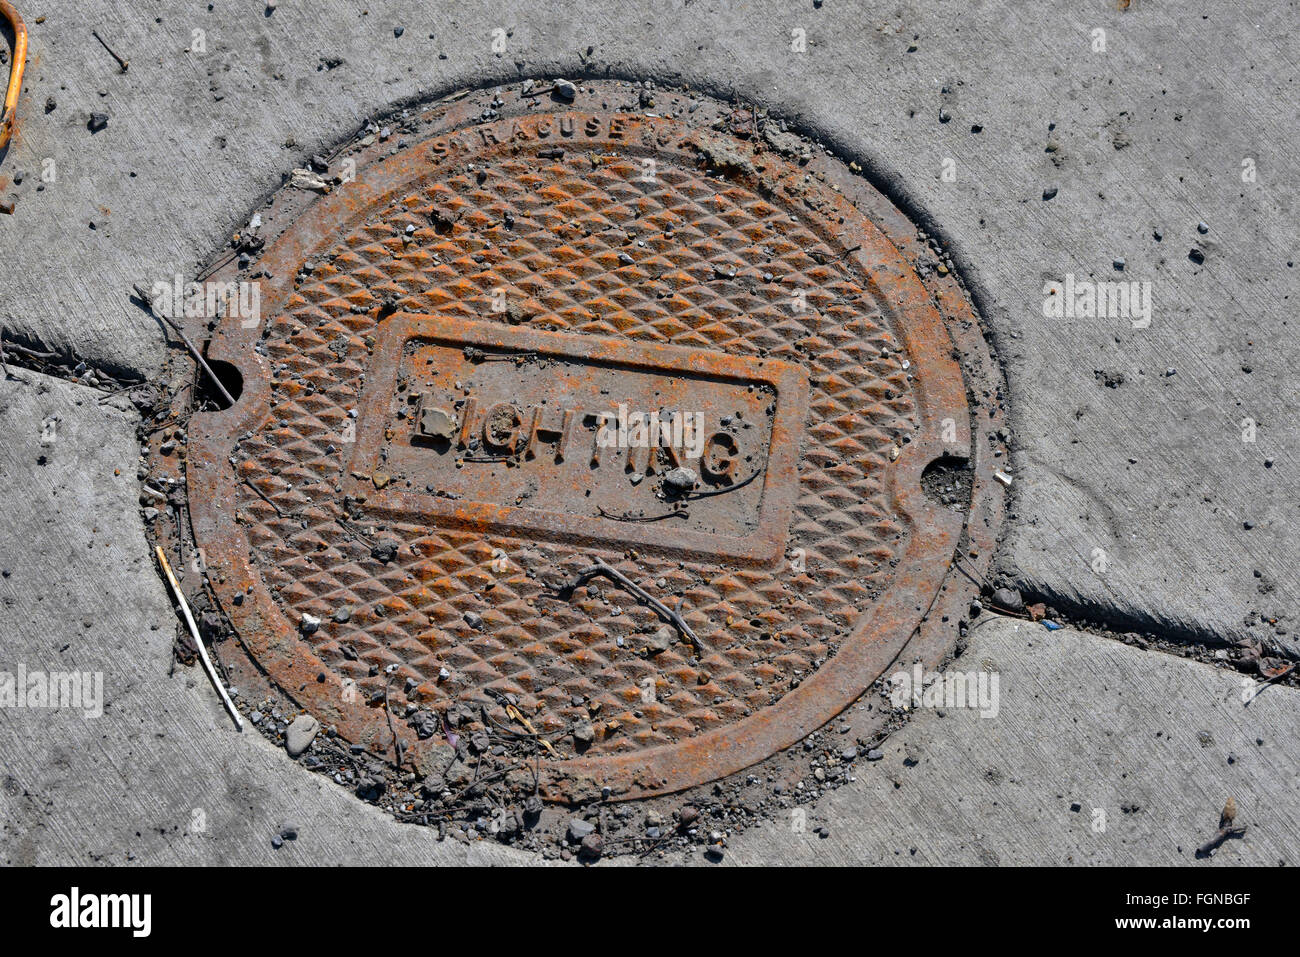 Street drains, sewer cover, water access, lighting access covers Stock Photo